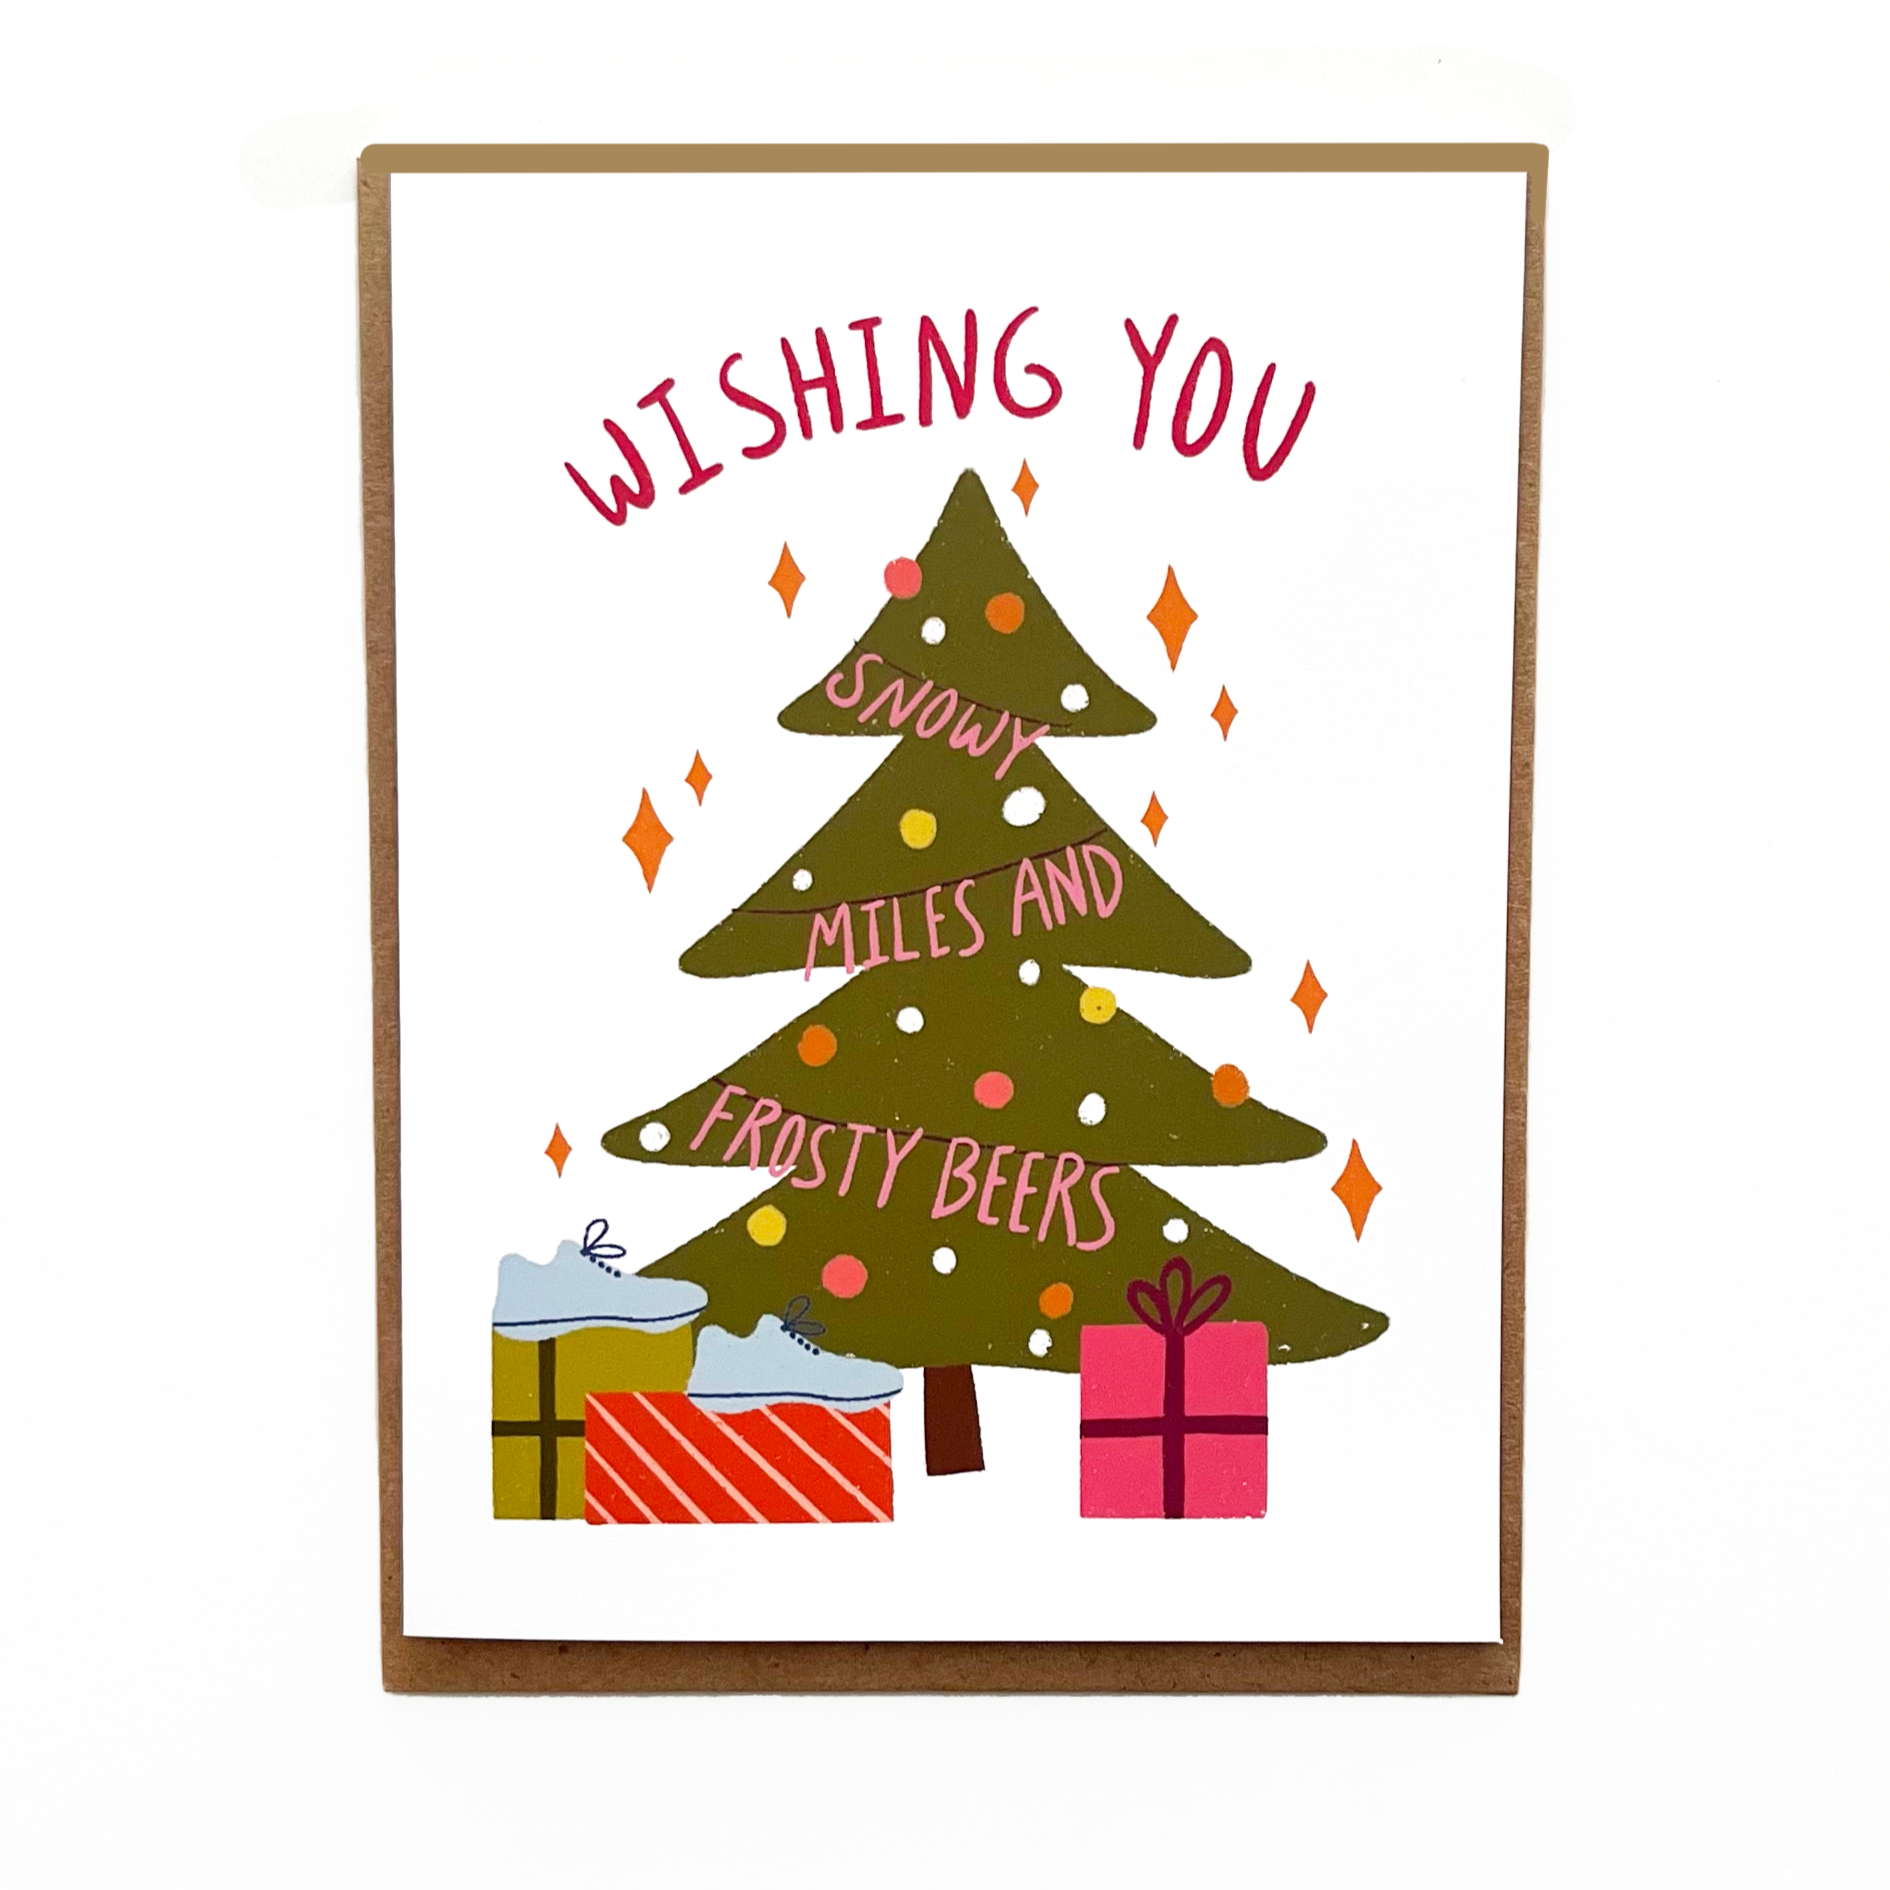 wishing you snowy miles and frosty beers card